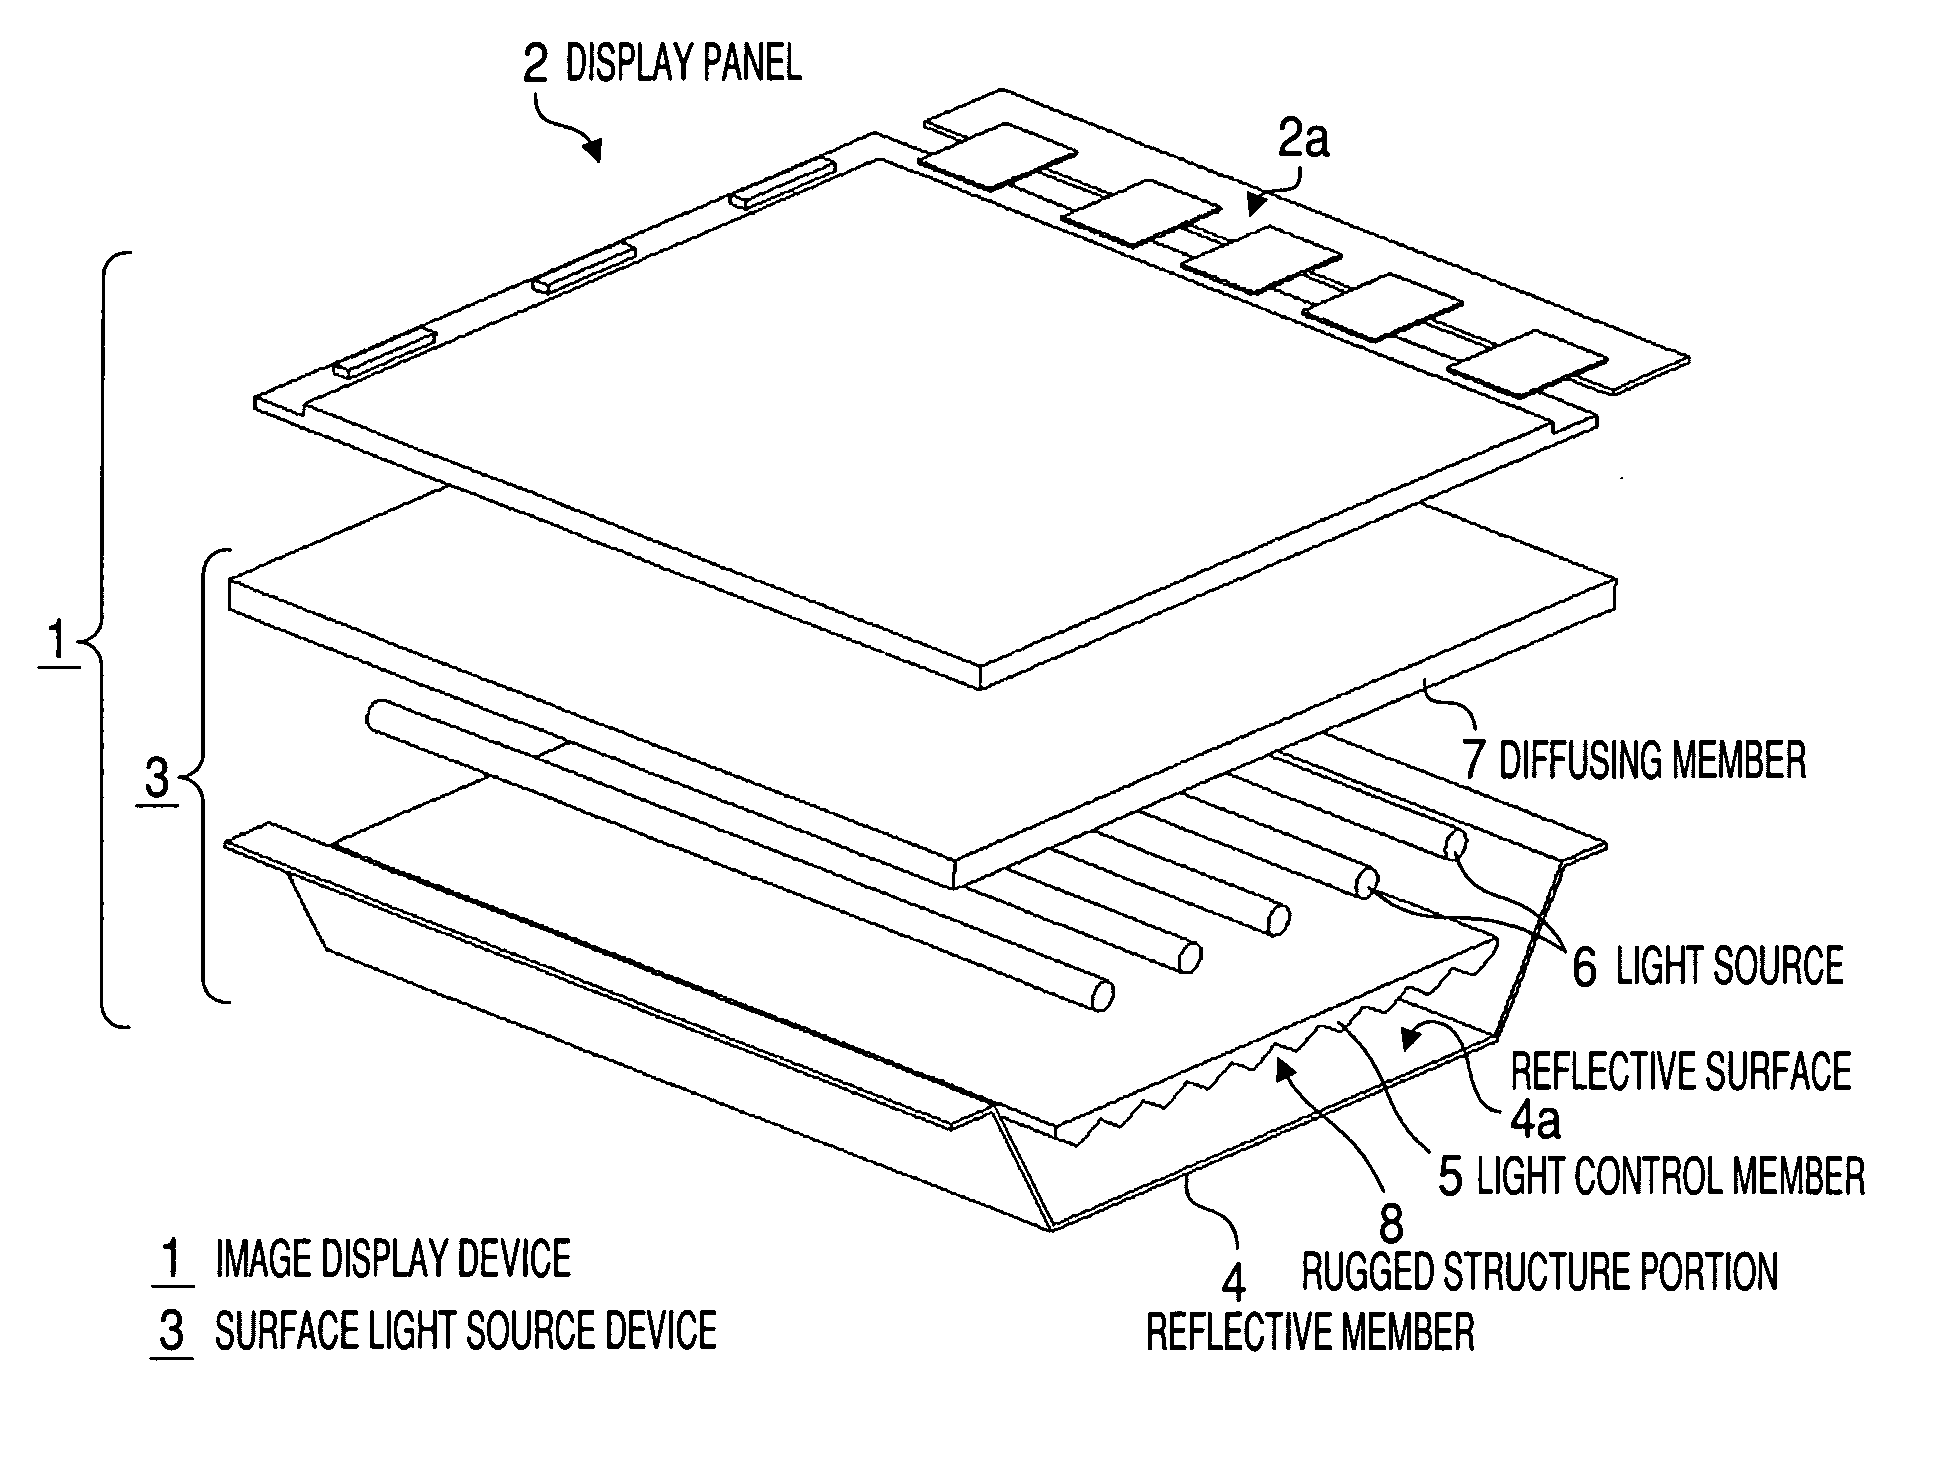 Surface light source device and image display device